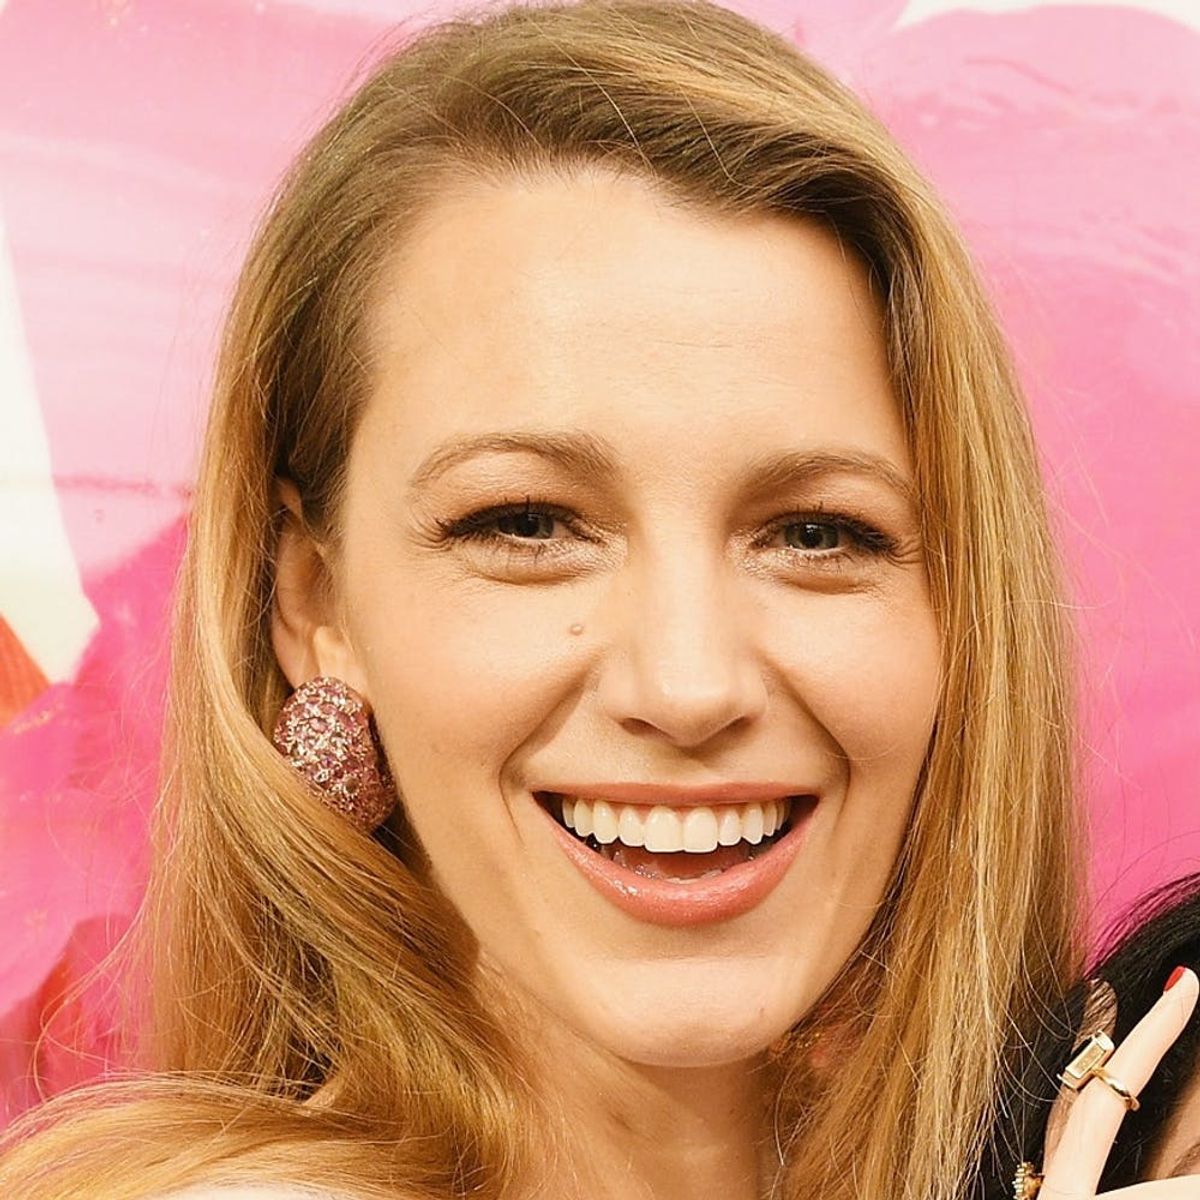 Blake Lively’s Red Hair and Pin-Up Bangs Are Retro Hair Goals